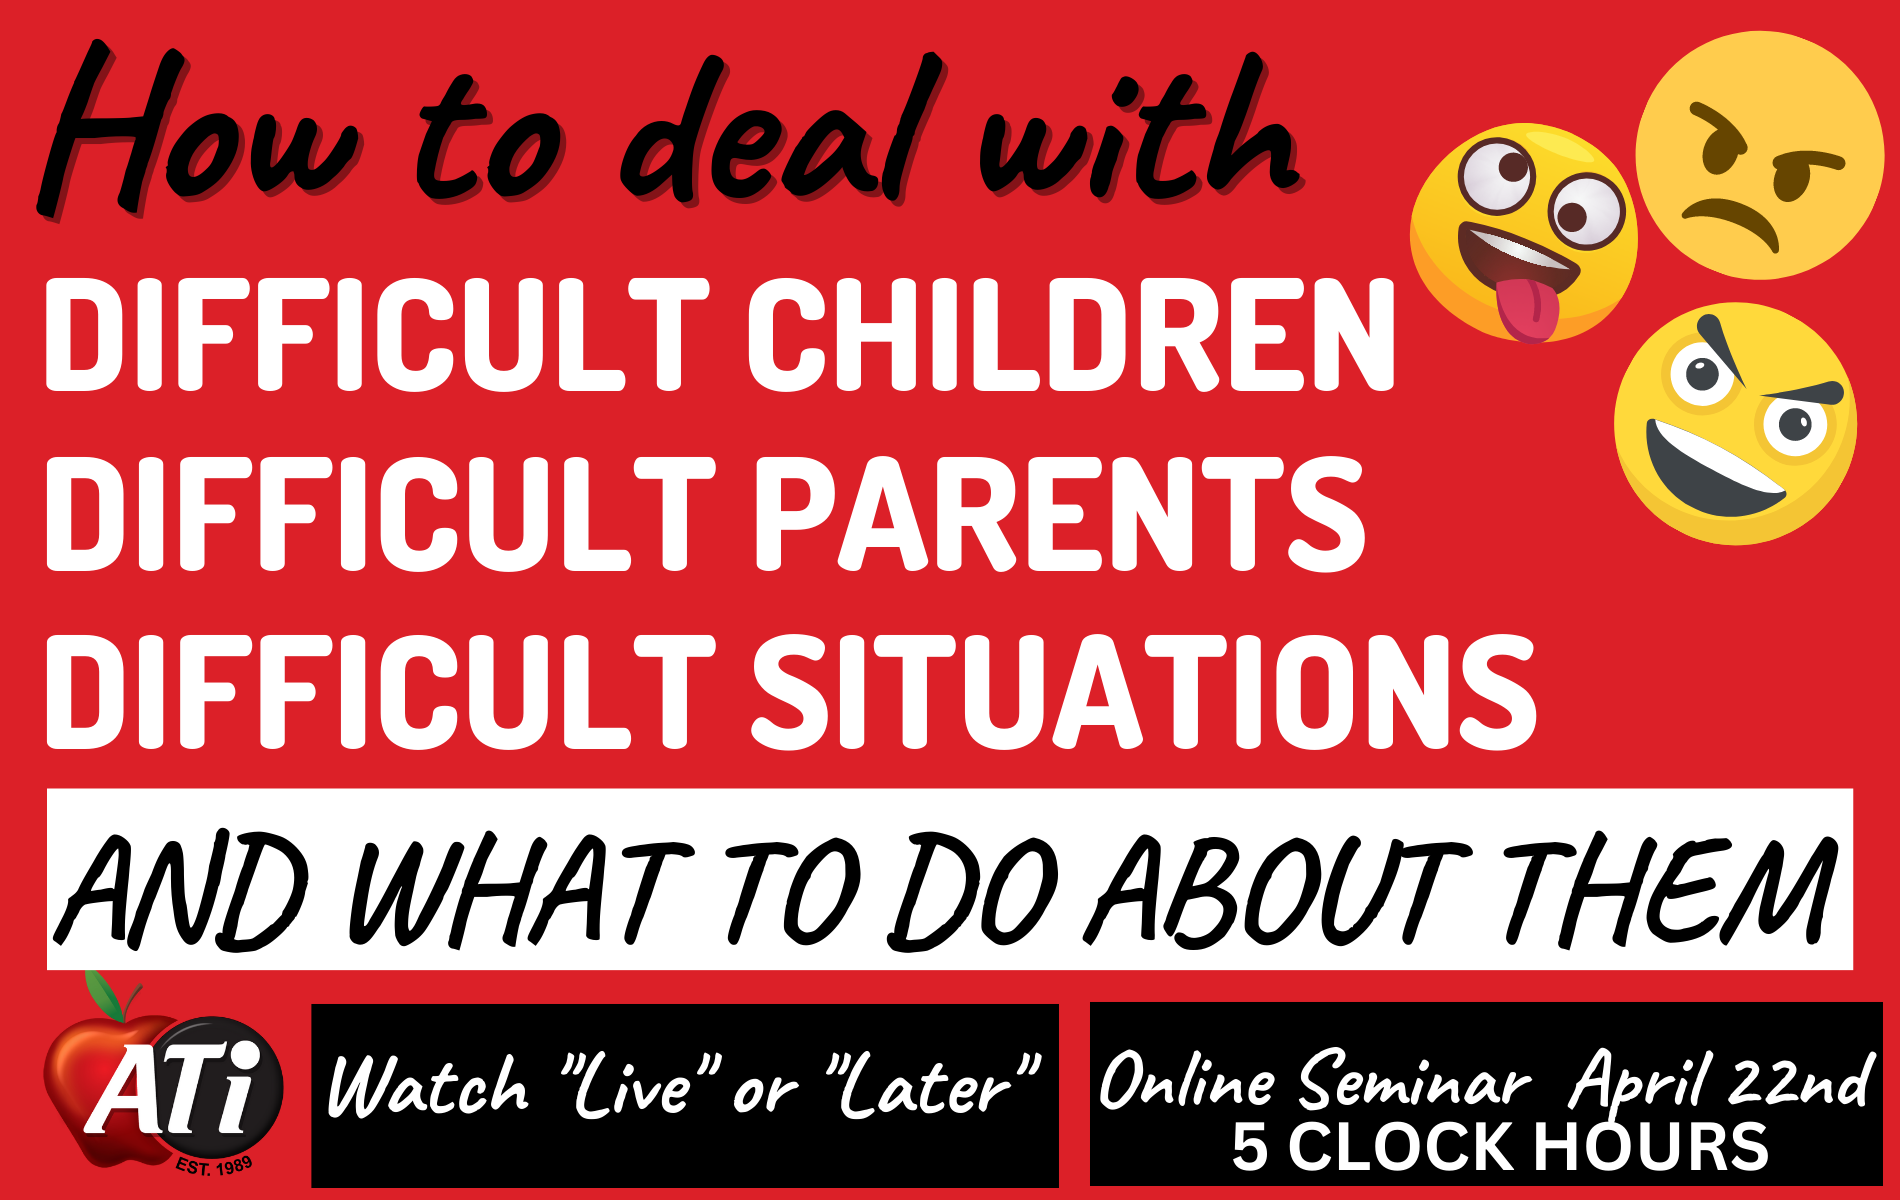 Image for How to Deal with Difficult Children, Difficult Parents, and Difficult Situations - ONLINE